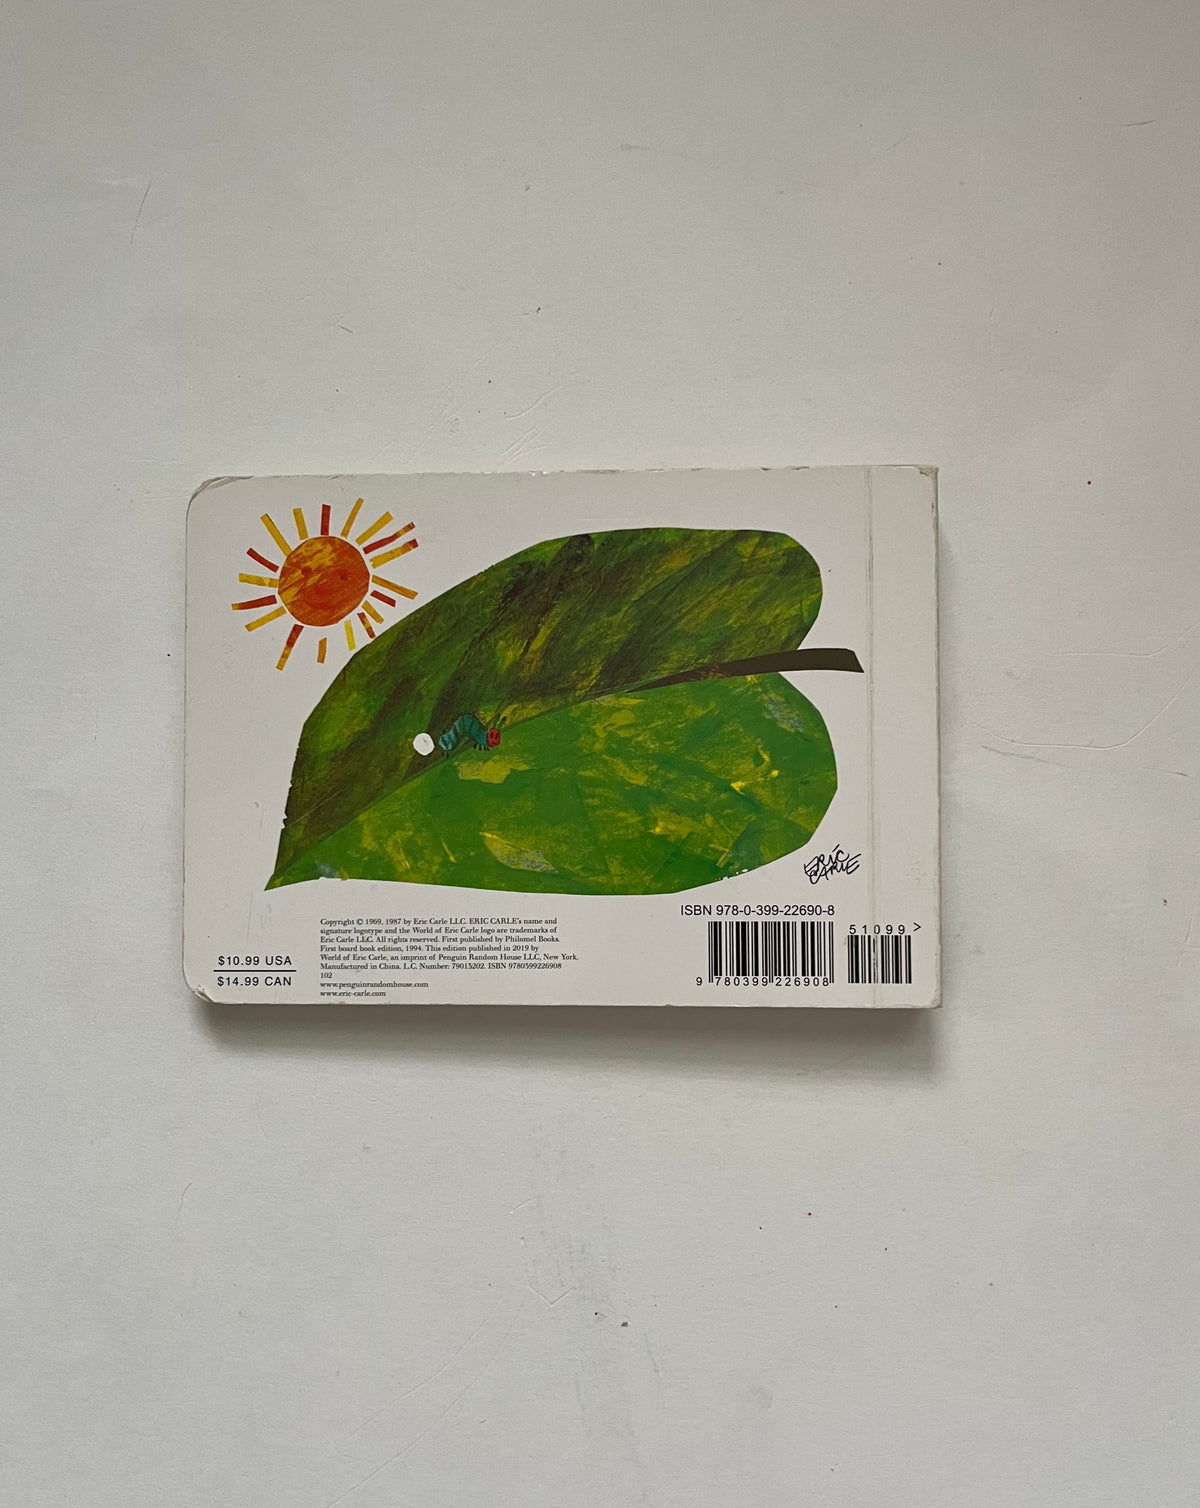 The Very Hungry Caterpillar by Eric Cole